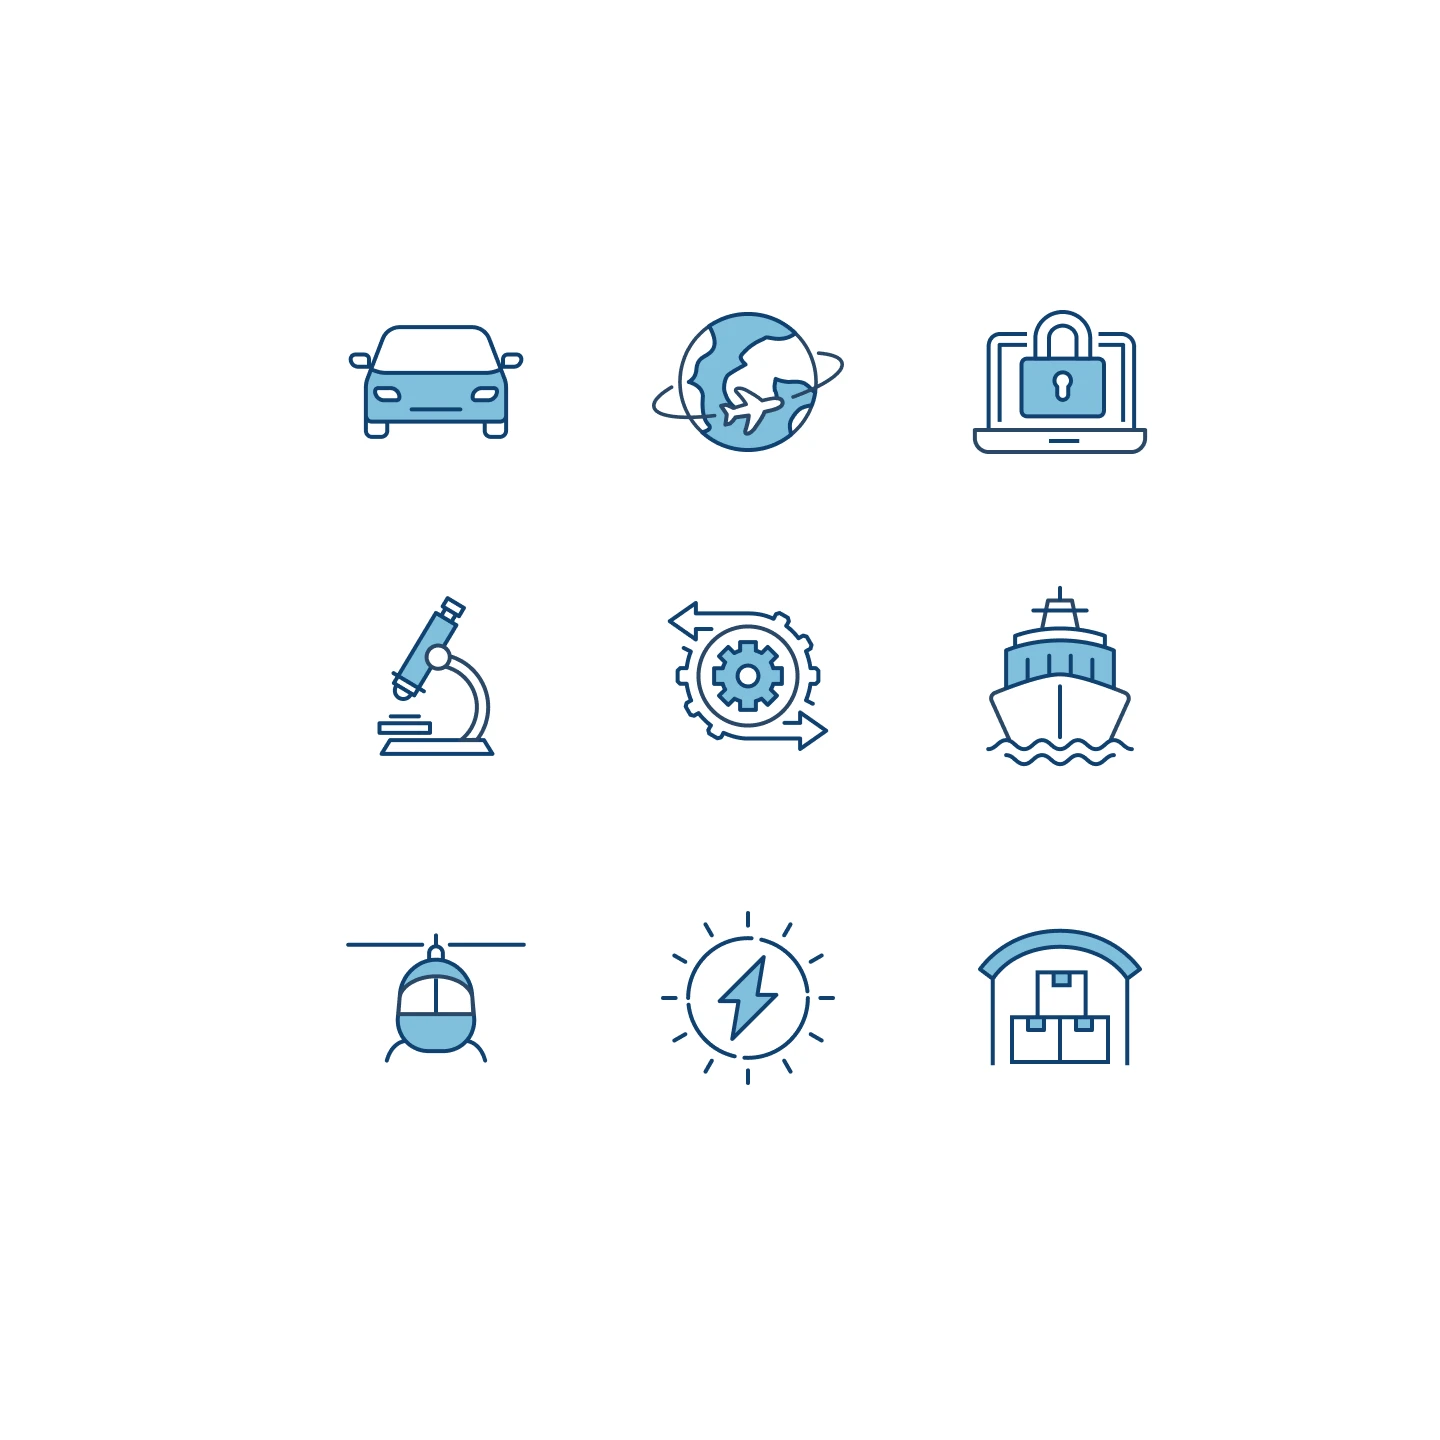 A grid of custom icons designed for the ARM recruitment website